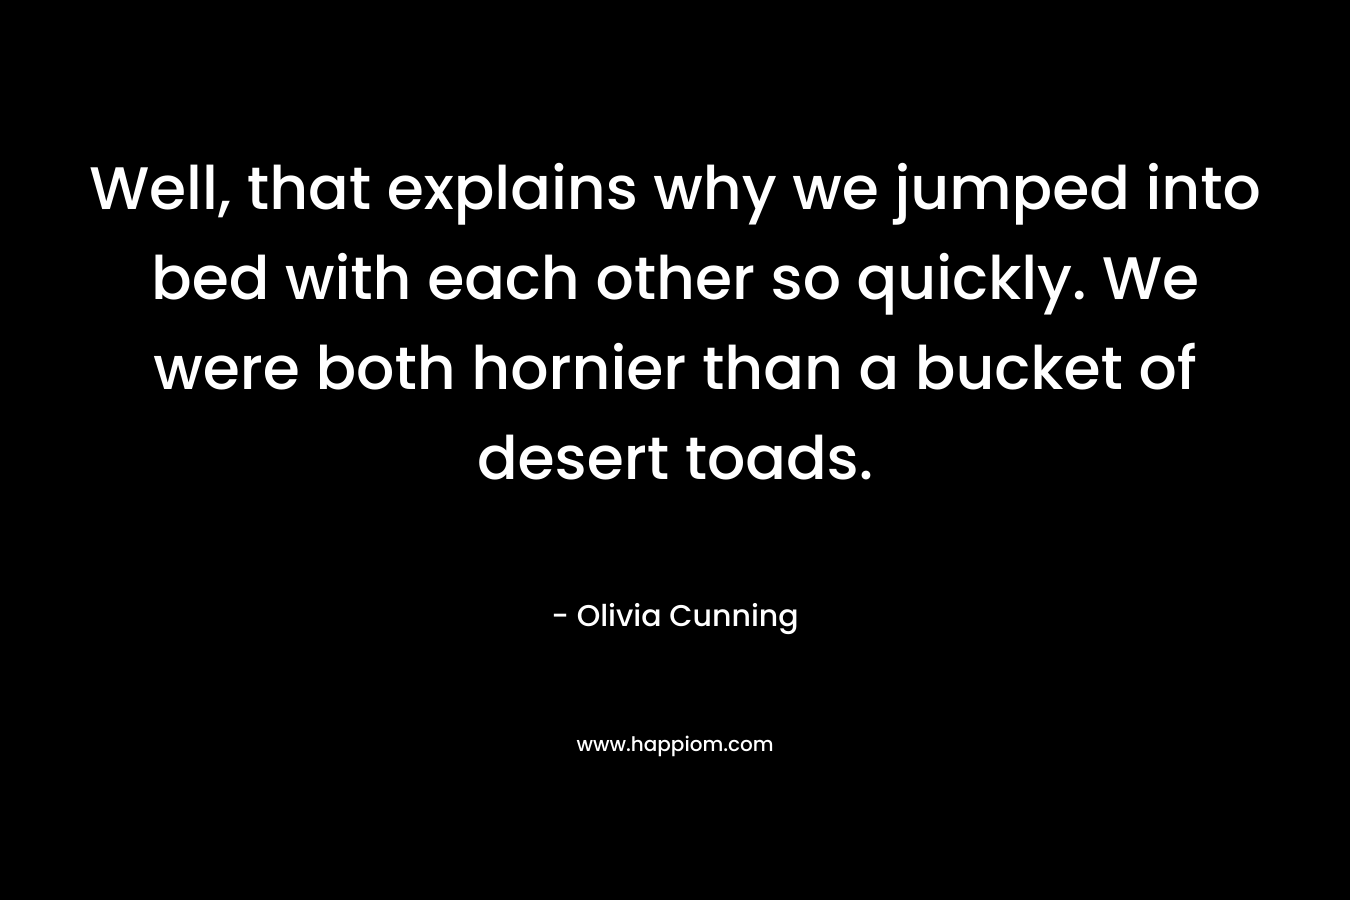 Well, that explains why we jumped into bed with each other so quickly. We were both hornier than a bucket of desert toads. – Olivia Cunning